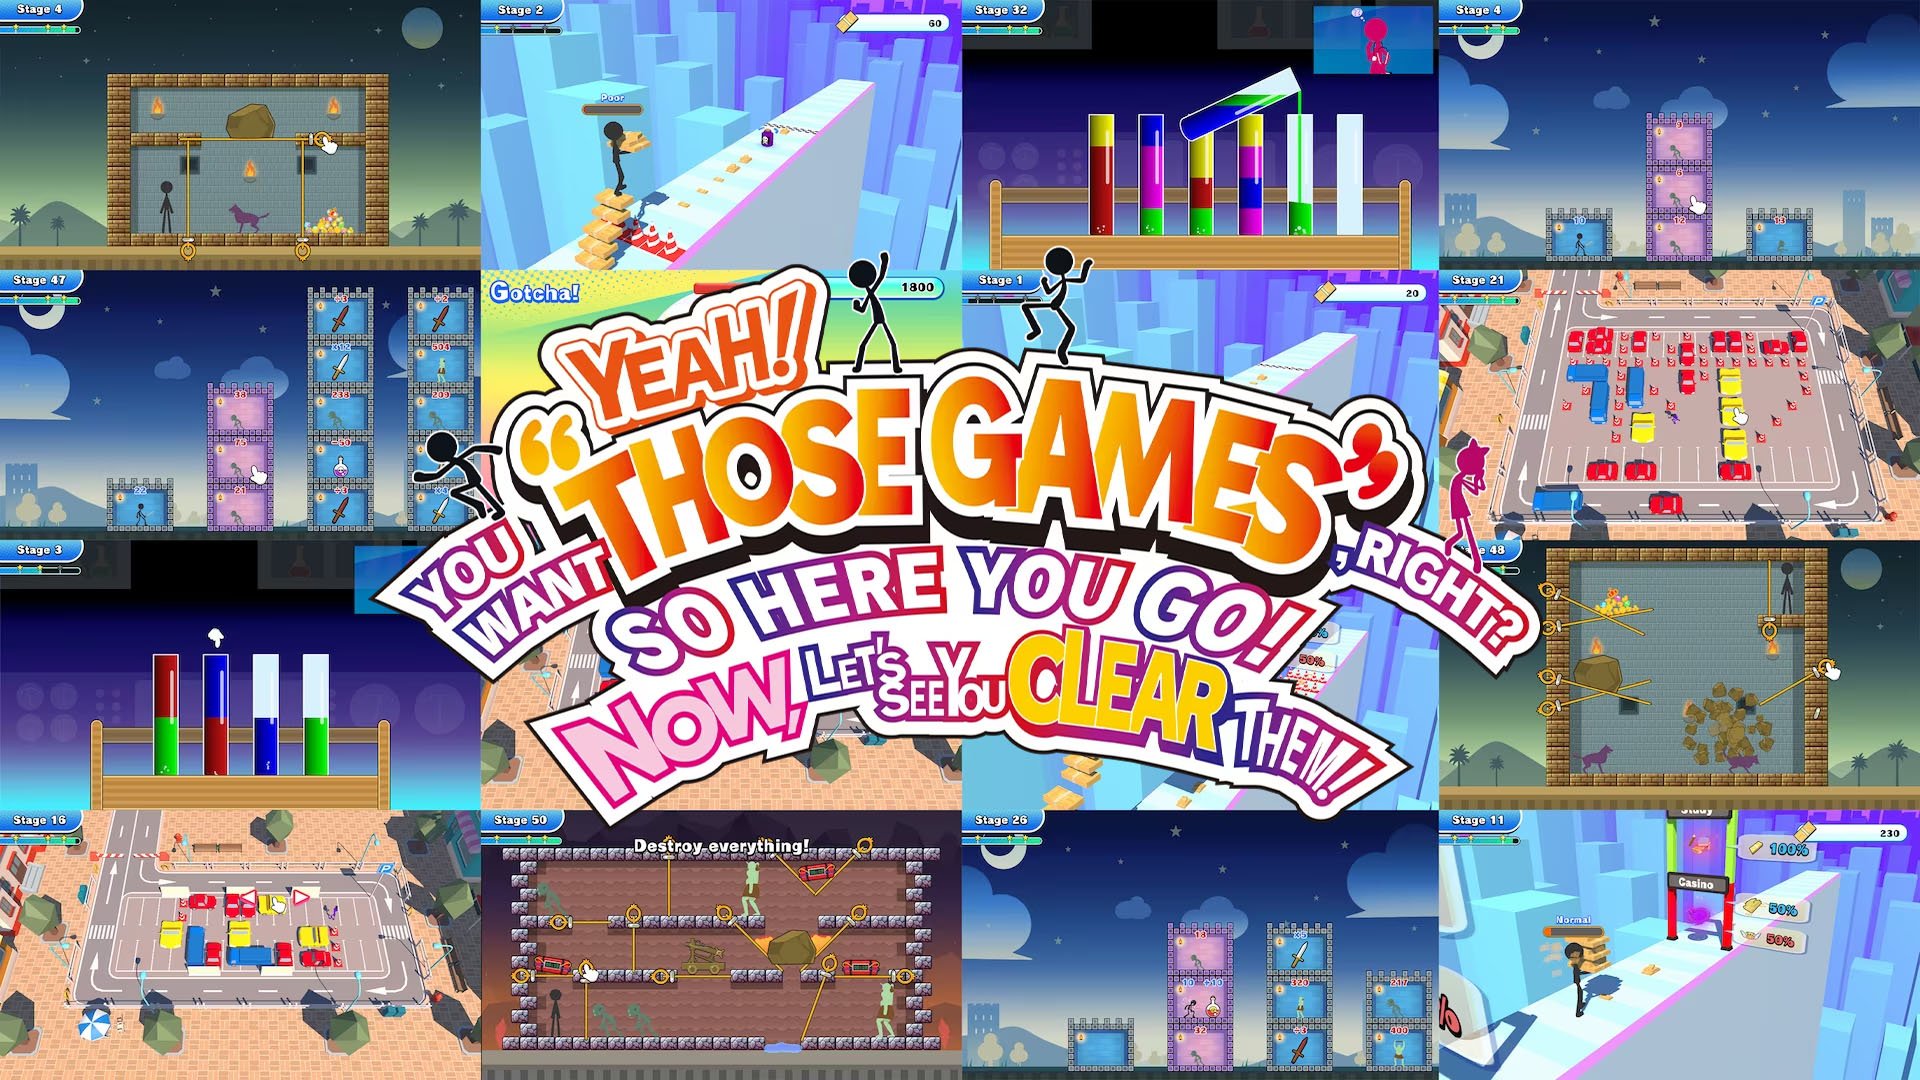 #
      YEAH! YOU WANT “THOSE GAMES,” RIGHT? SO HERE YOU GO! NOW, LET’S SEE YOU CLEAR THEM! coming to PS5, PS4 on January 11